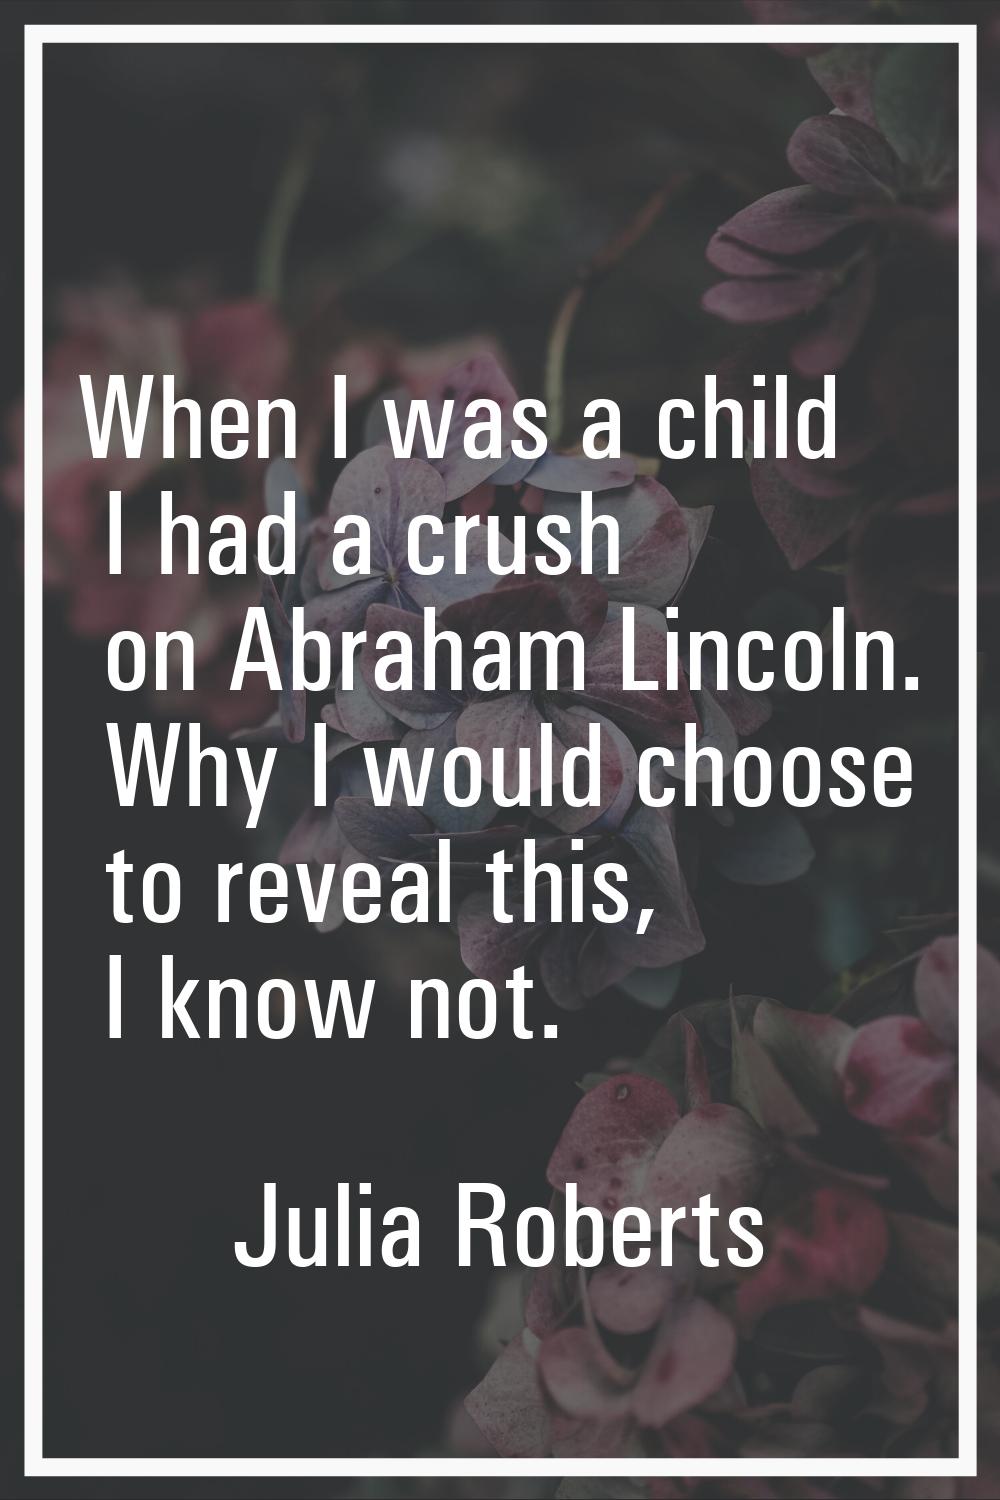 When I was a child I had a crush on Abraham Lincoln. Why I would choose to reveal this, I know not.